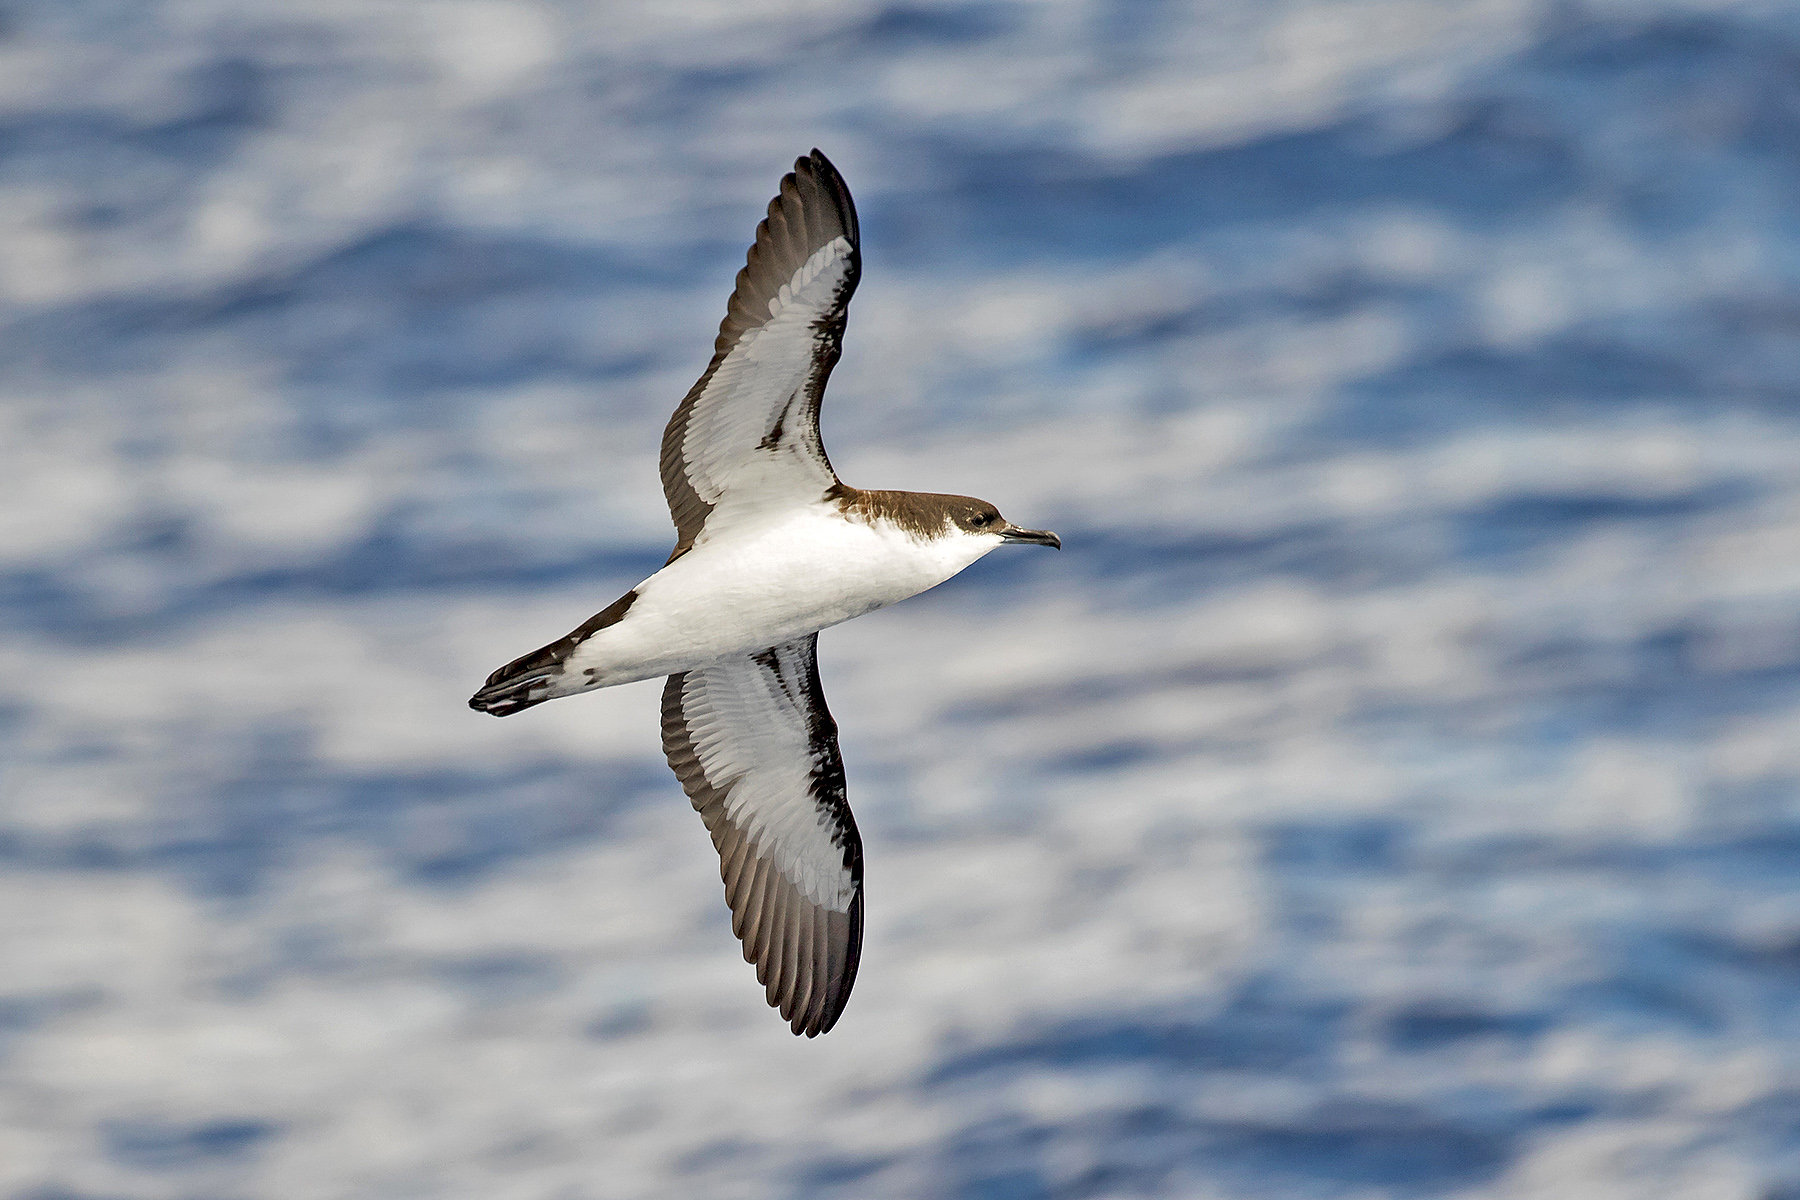 Newell's Shearwater on our Hawaii birding tour (image by Pete Morris)